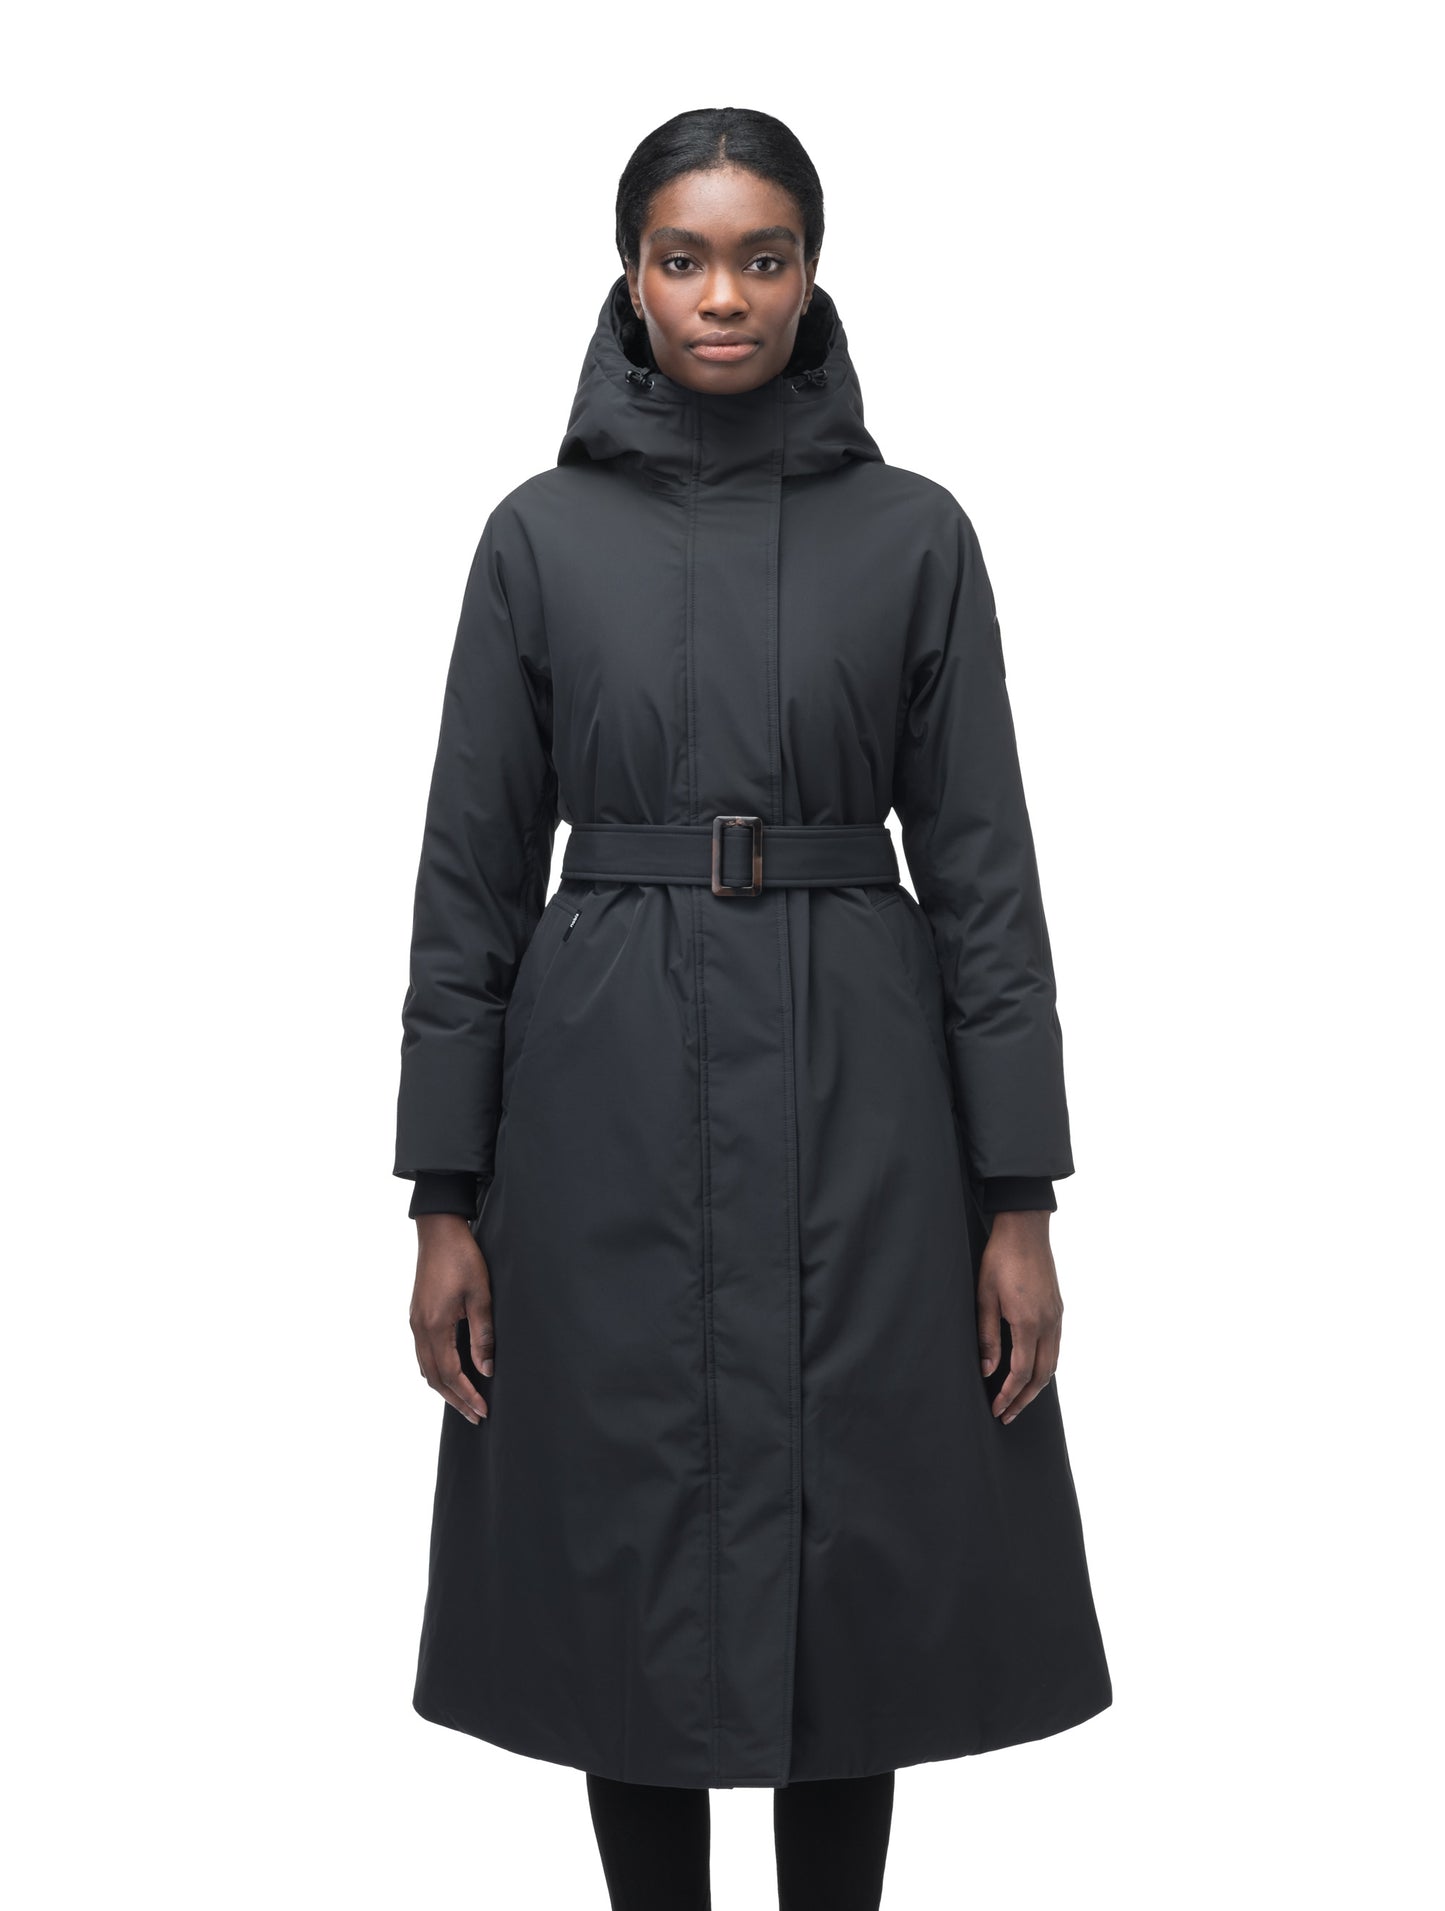 Women's knee length down filled parka with non-removable hood and adjustable belt in Black